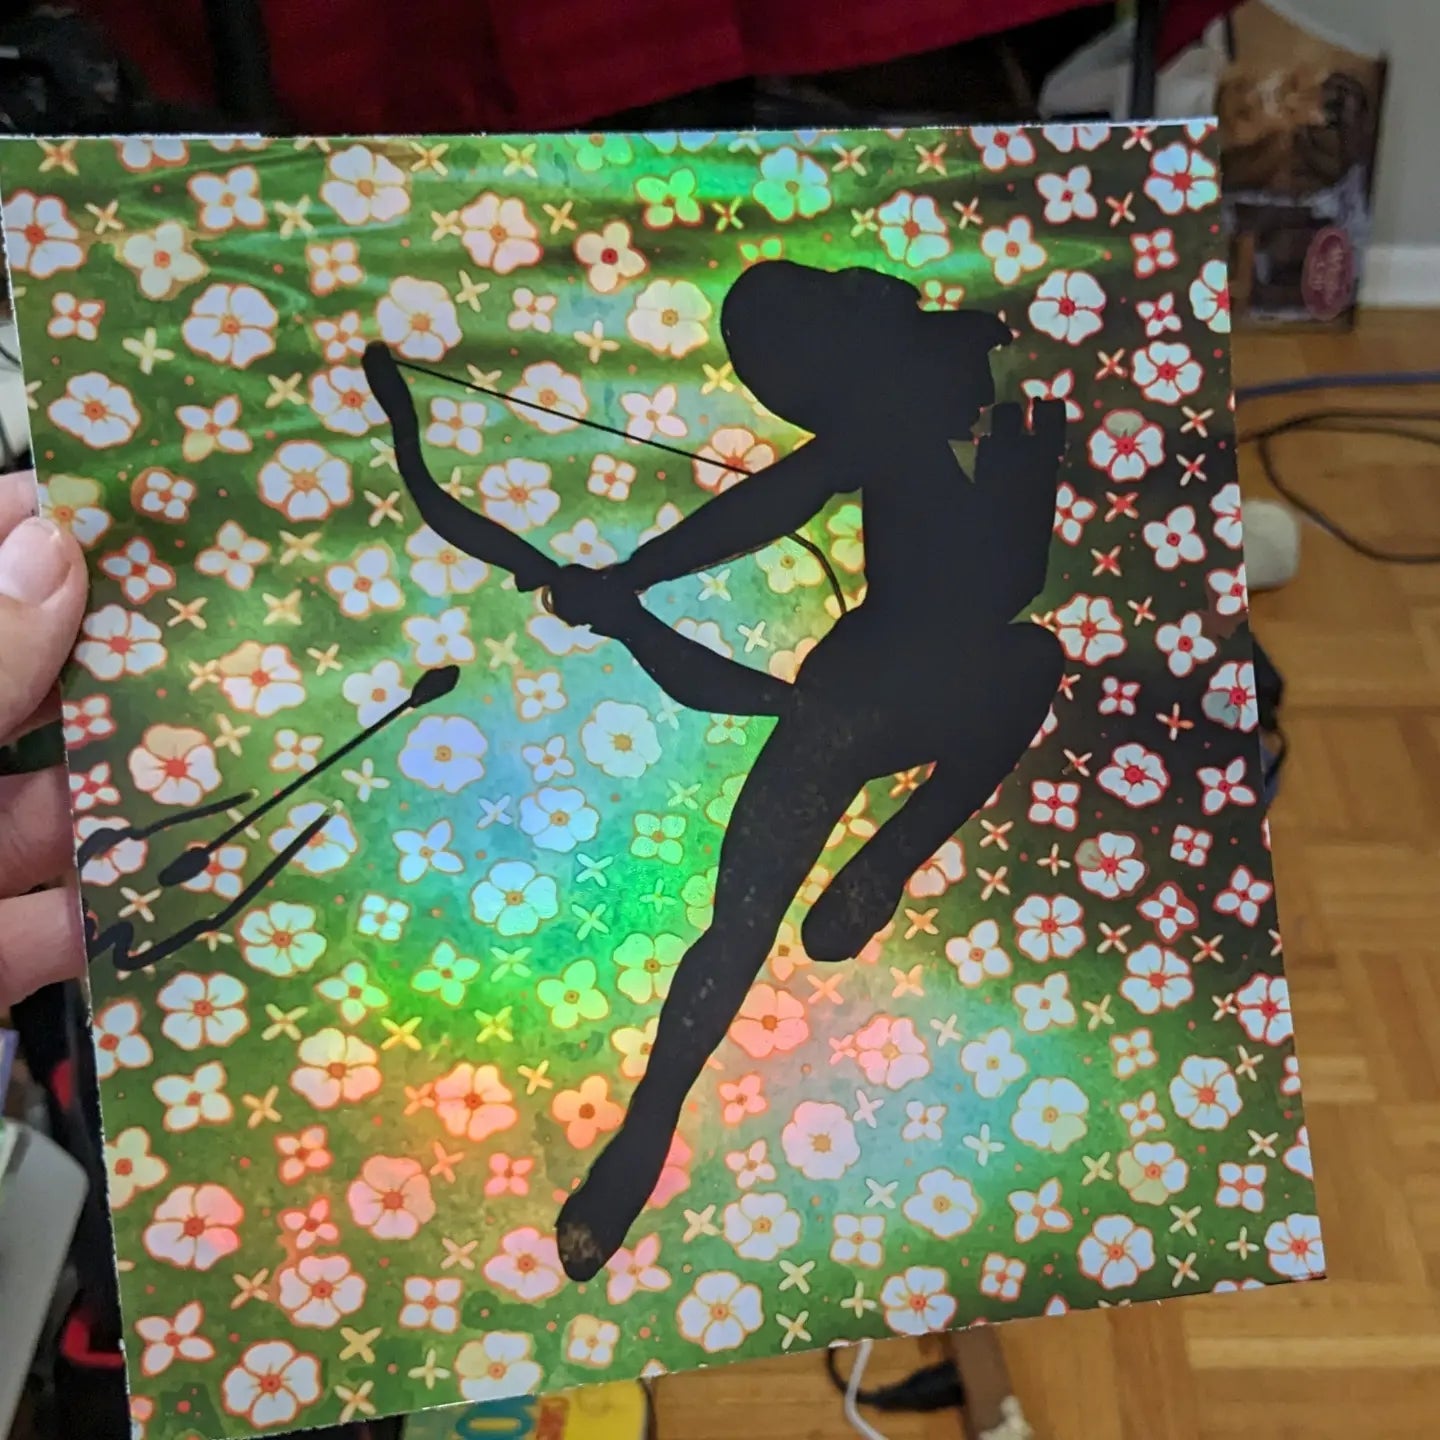 Holographic special edition archer silhouette print 8x8